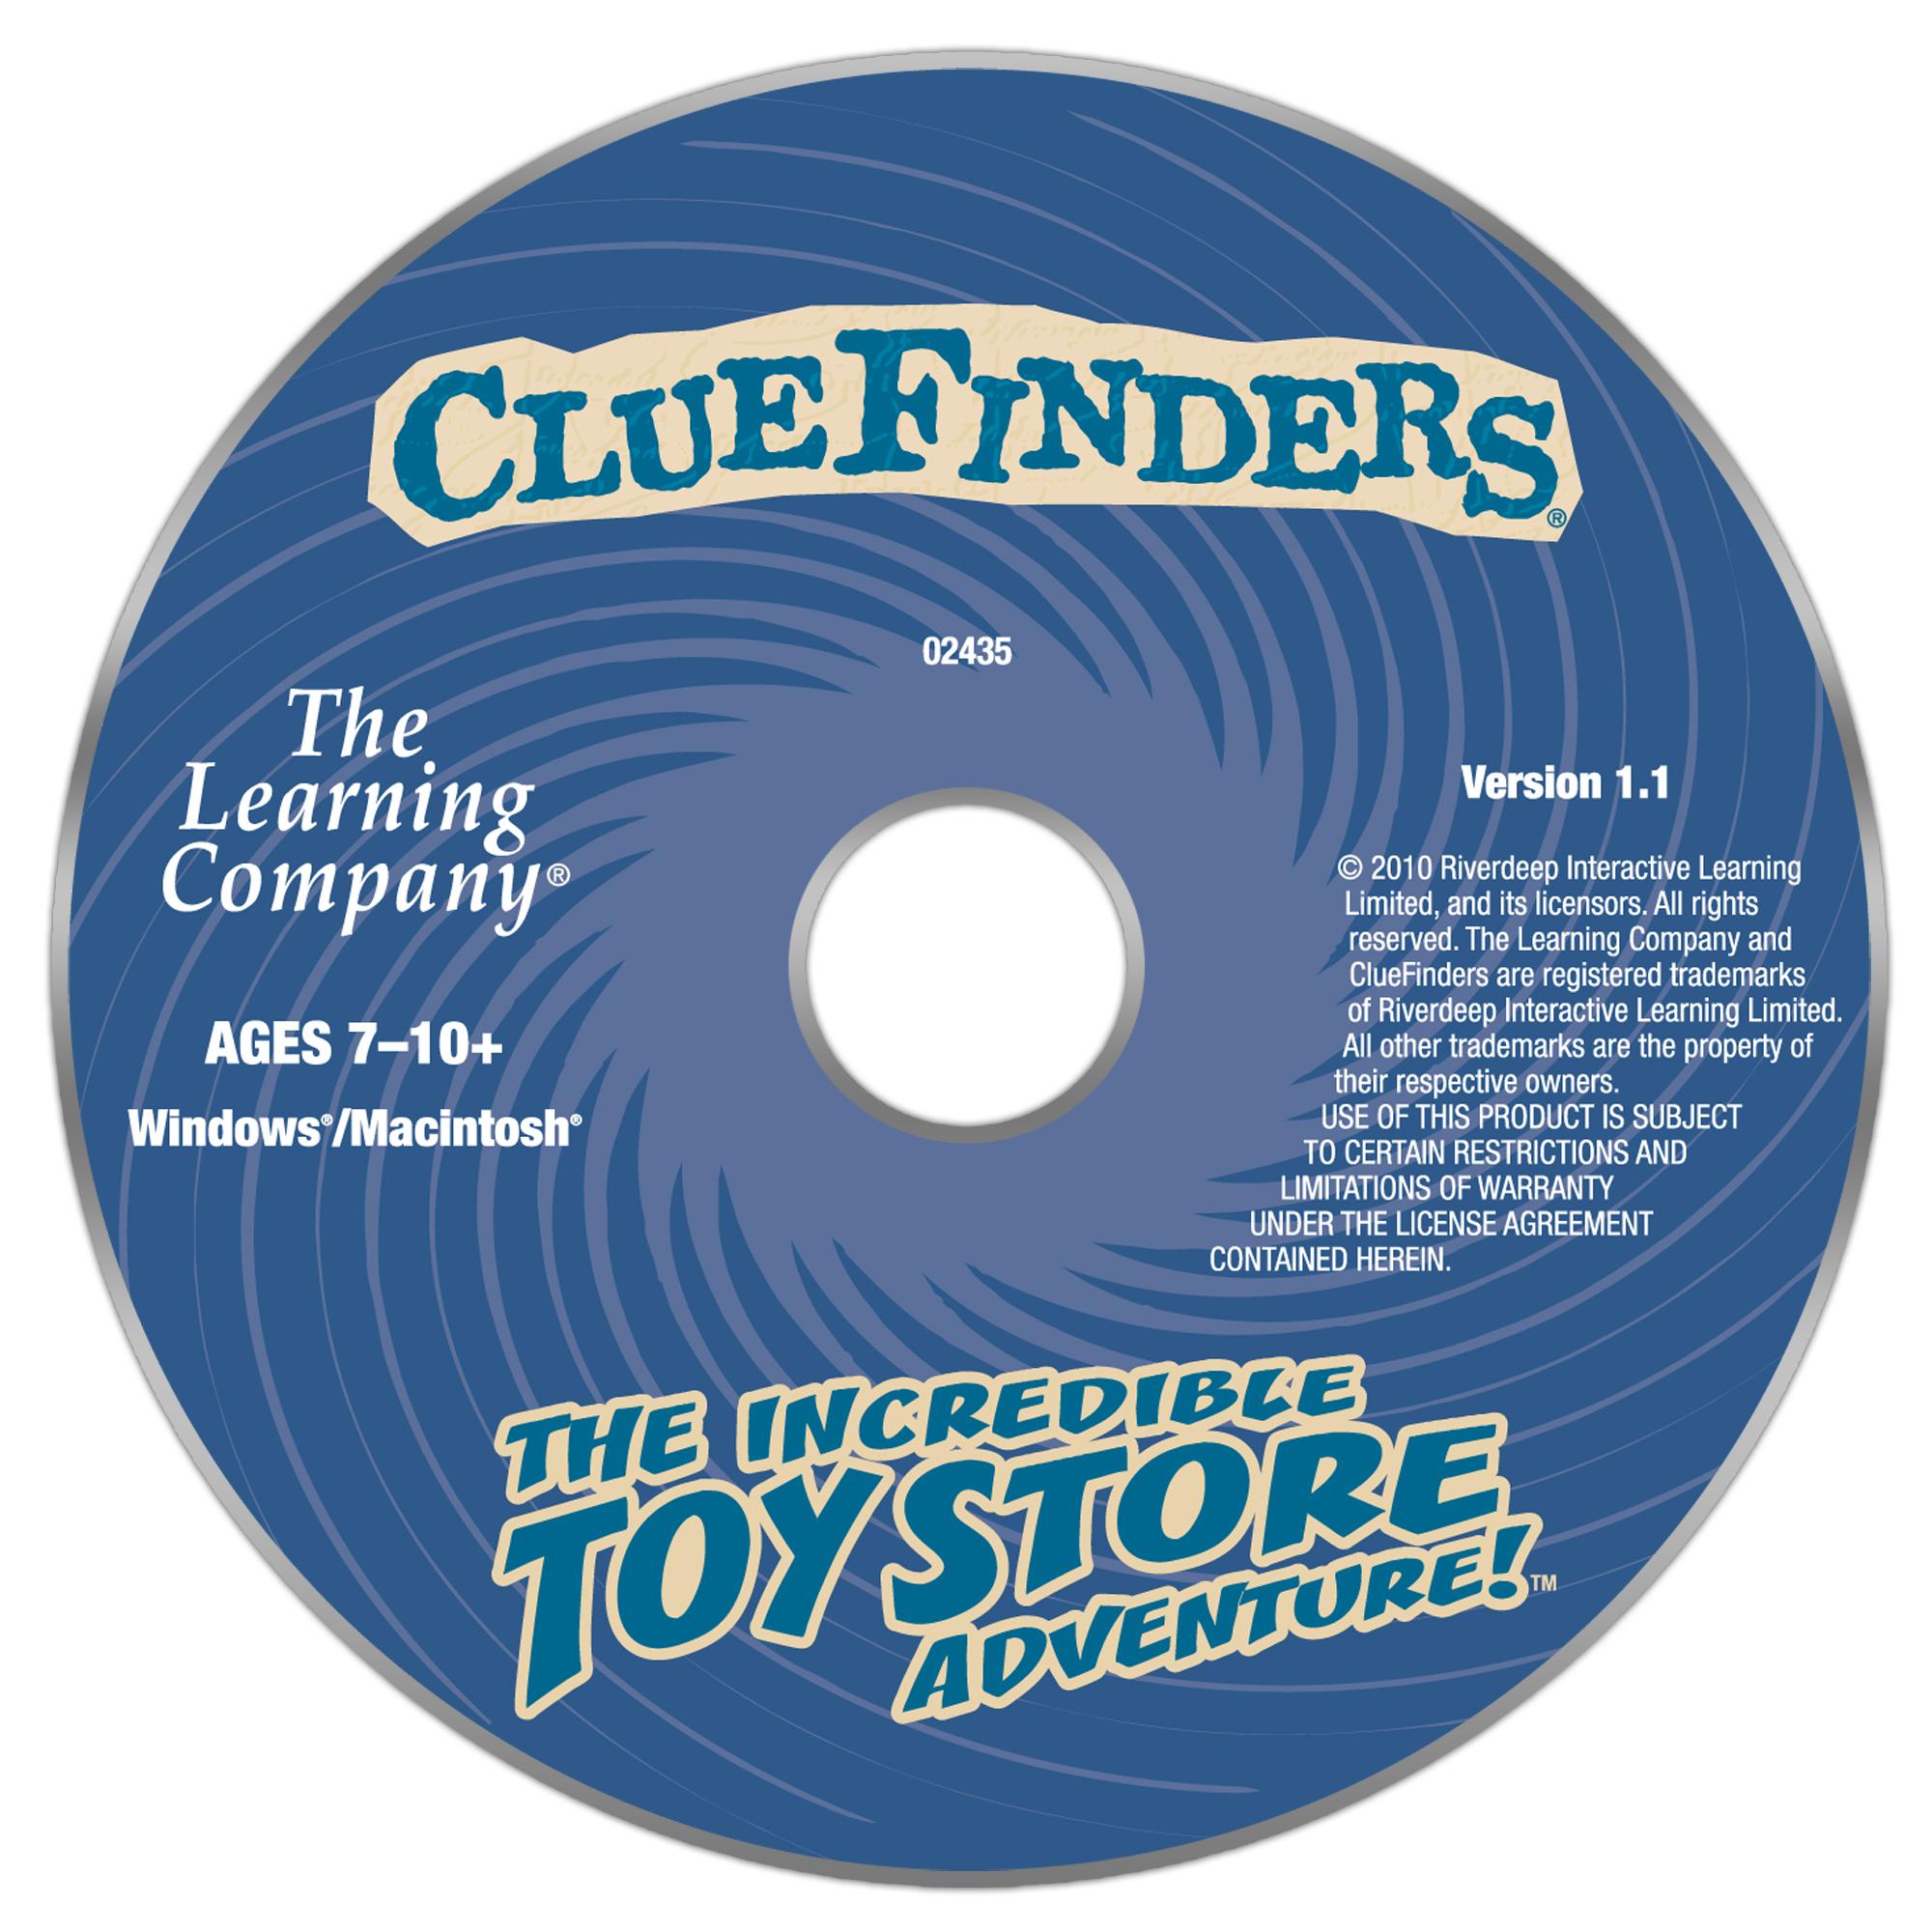 ClueFinders Incredible Toy Store Adventure Children's